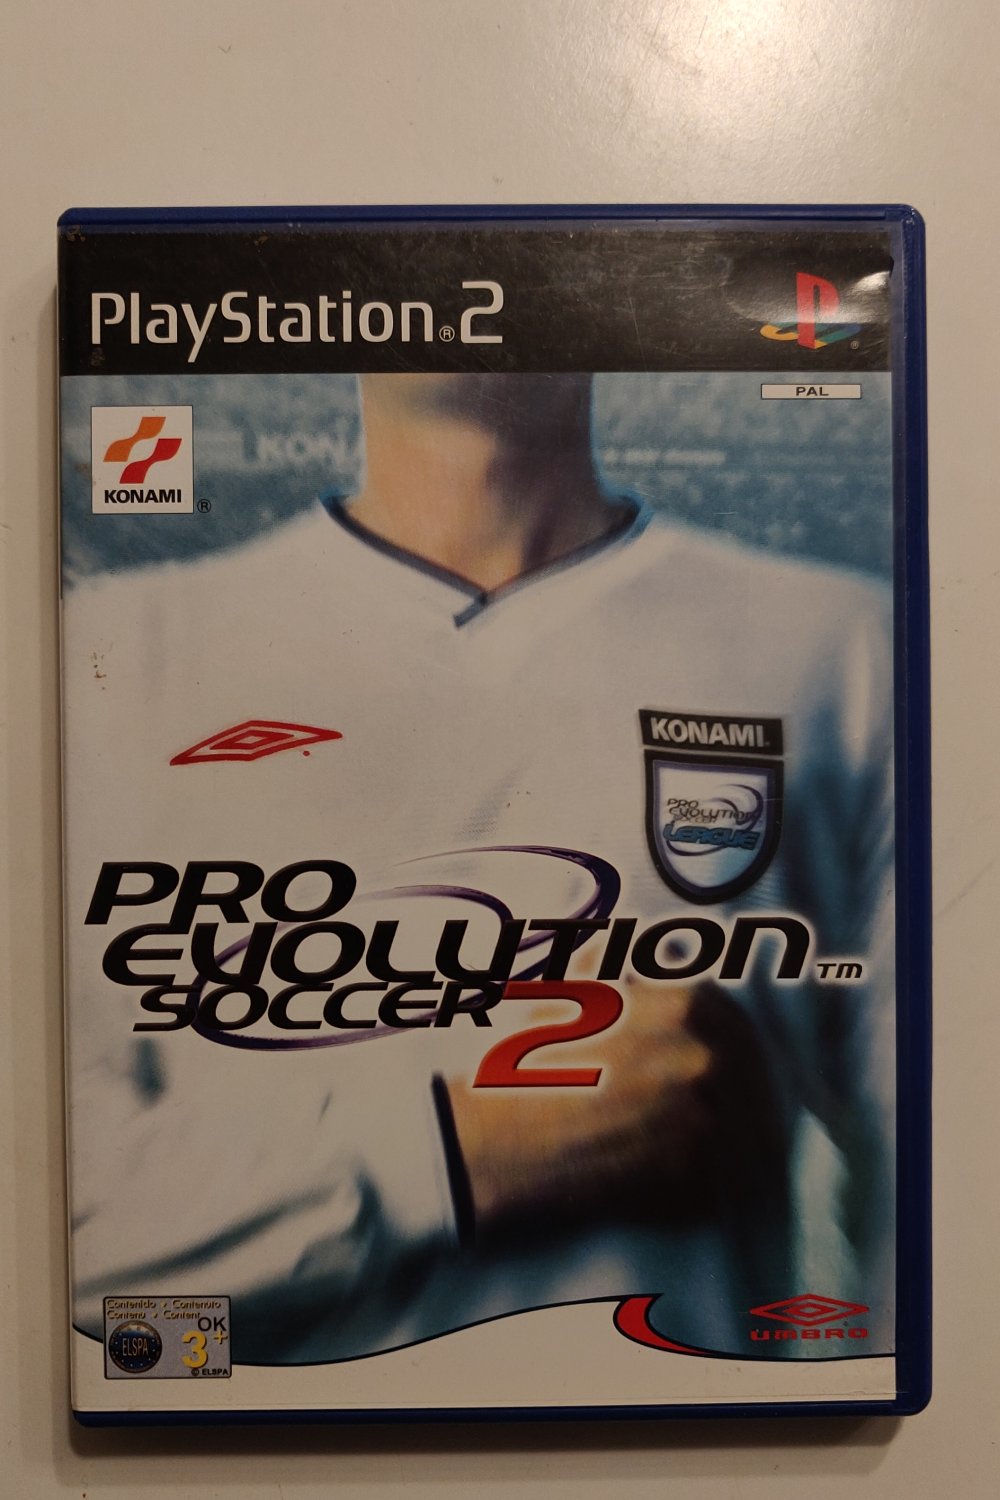 Pro Evolution Soccer 2 (Playstation 2 PAL) (CIB) - Picture 1 of 1